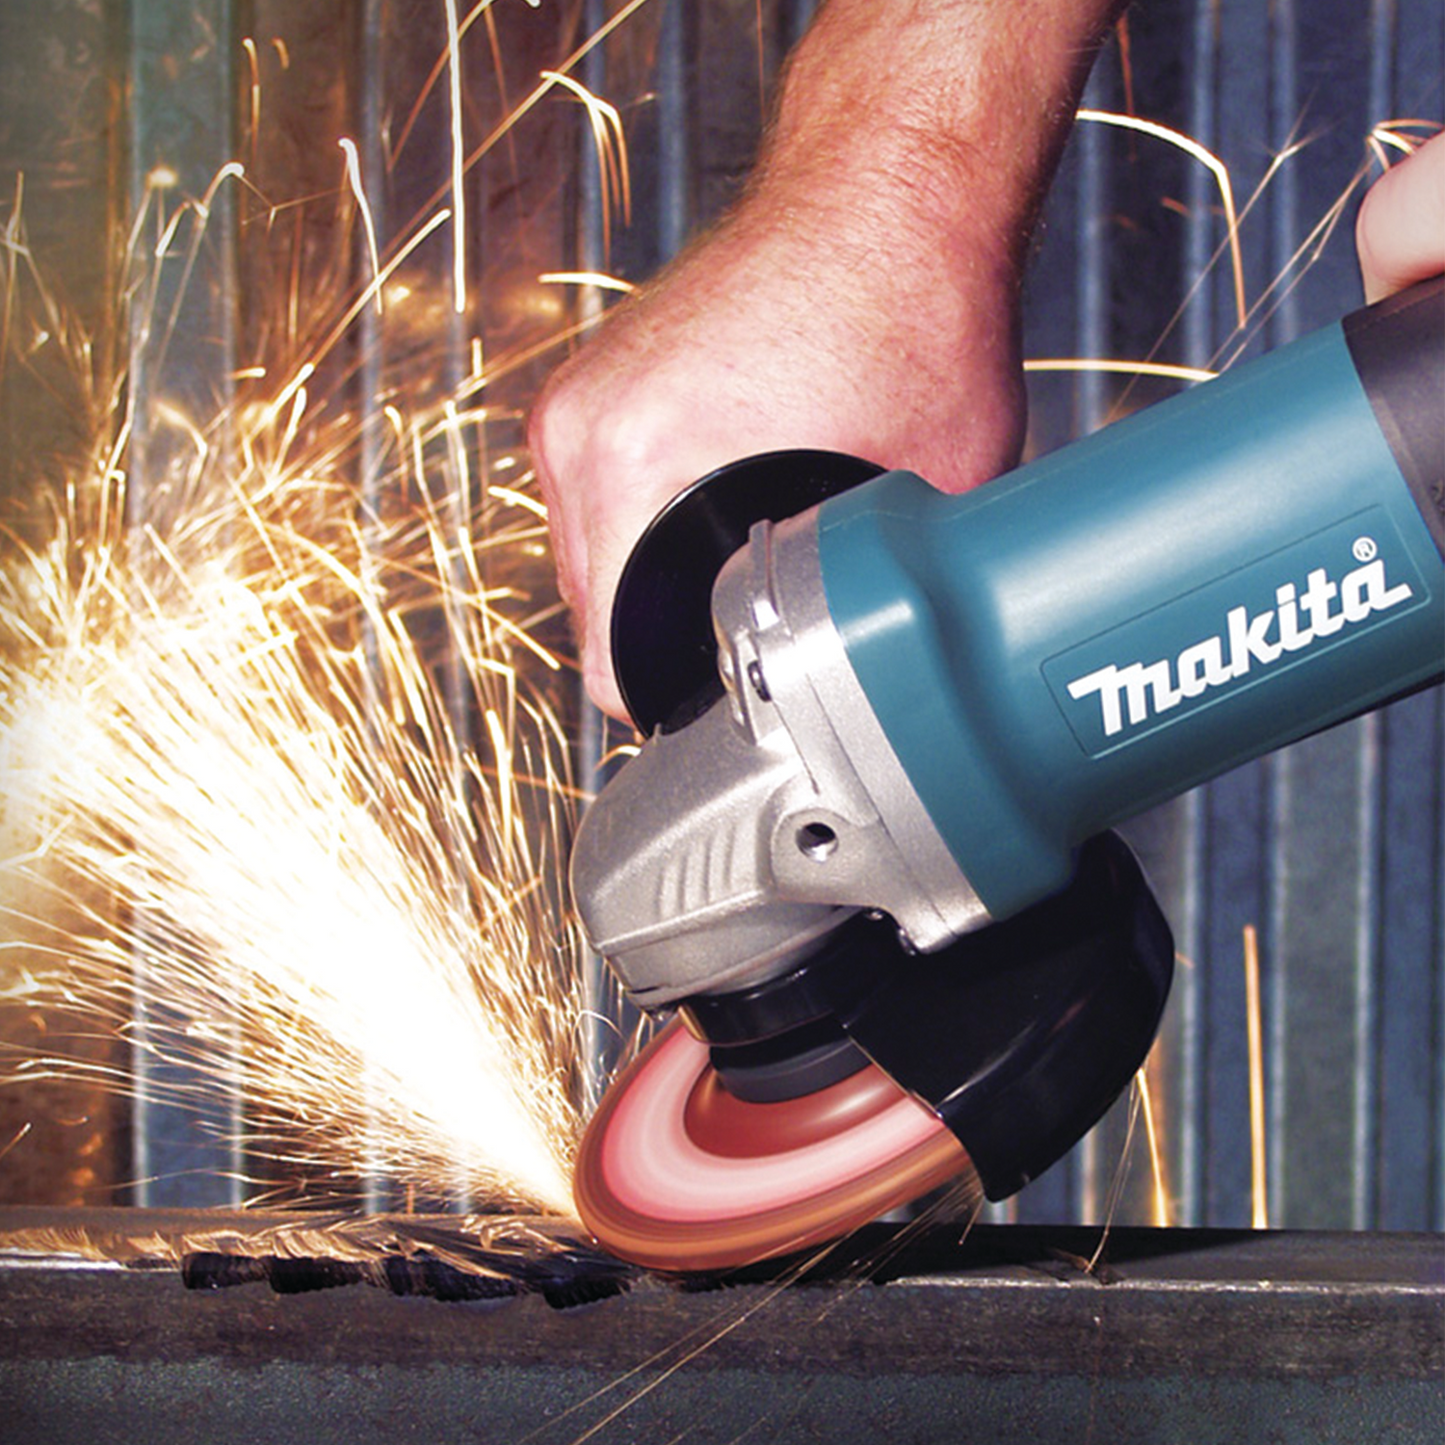 Makita Paddle Switch Angle Grinder 4 1/2 Inch Factory Serviced